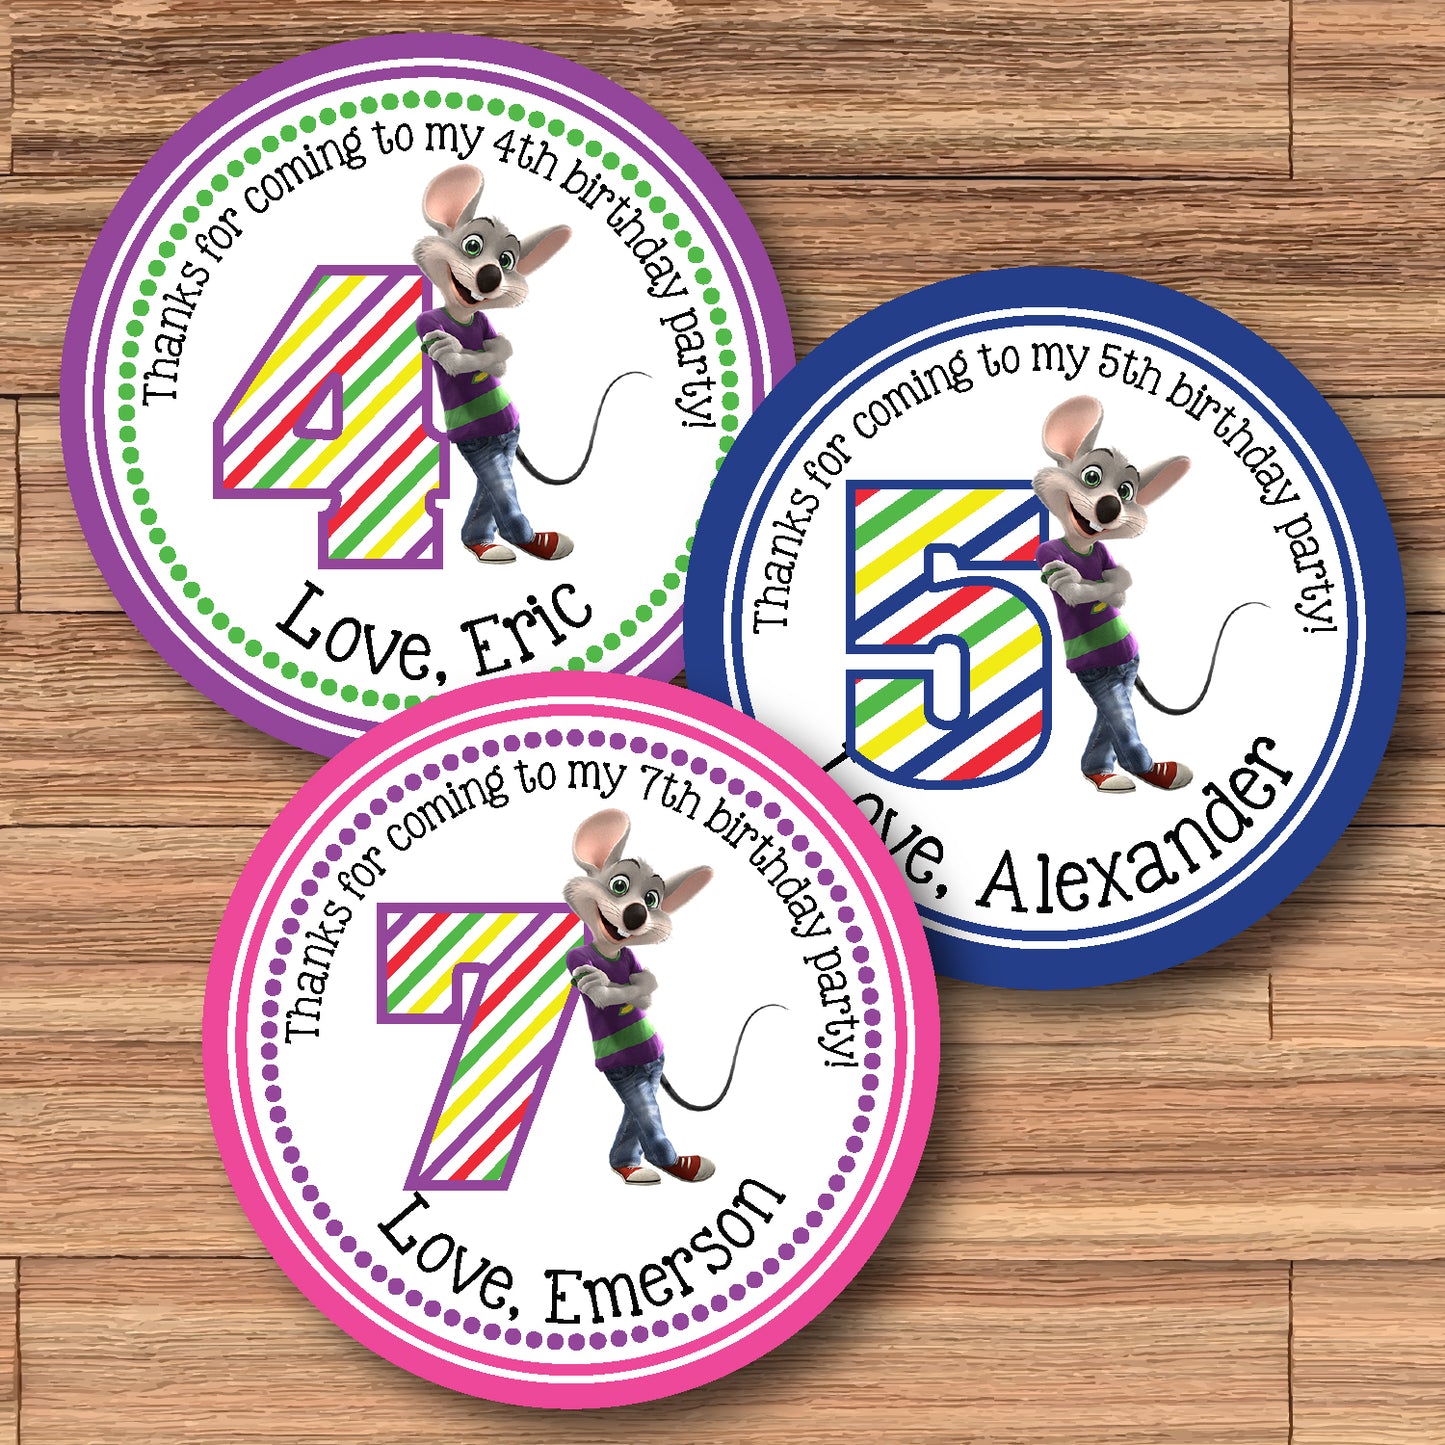 CHUCK E CHEESE Purple, Pink or Blue Custom Stickers for Gift Bags, Party Favors! Printed or Digital!